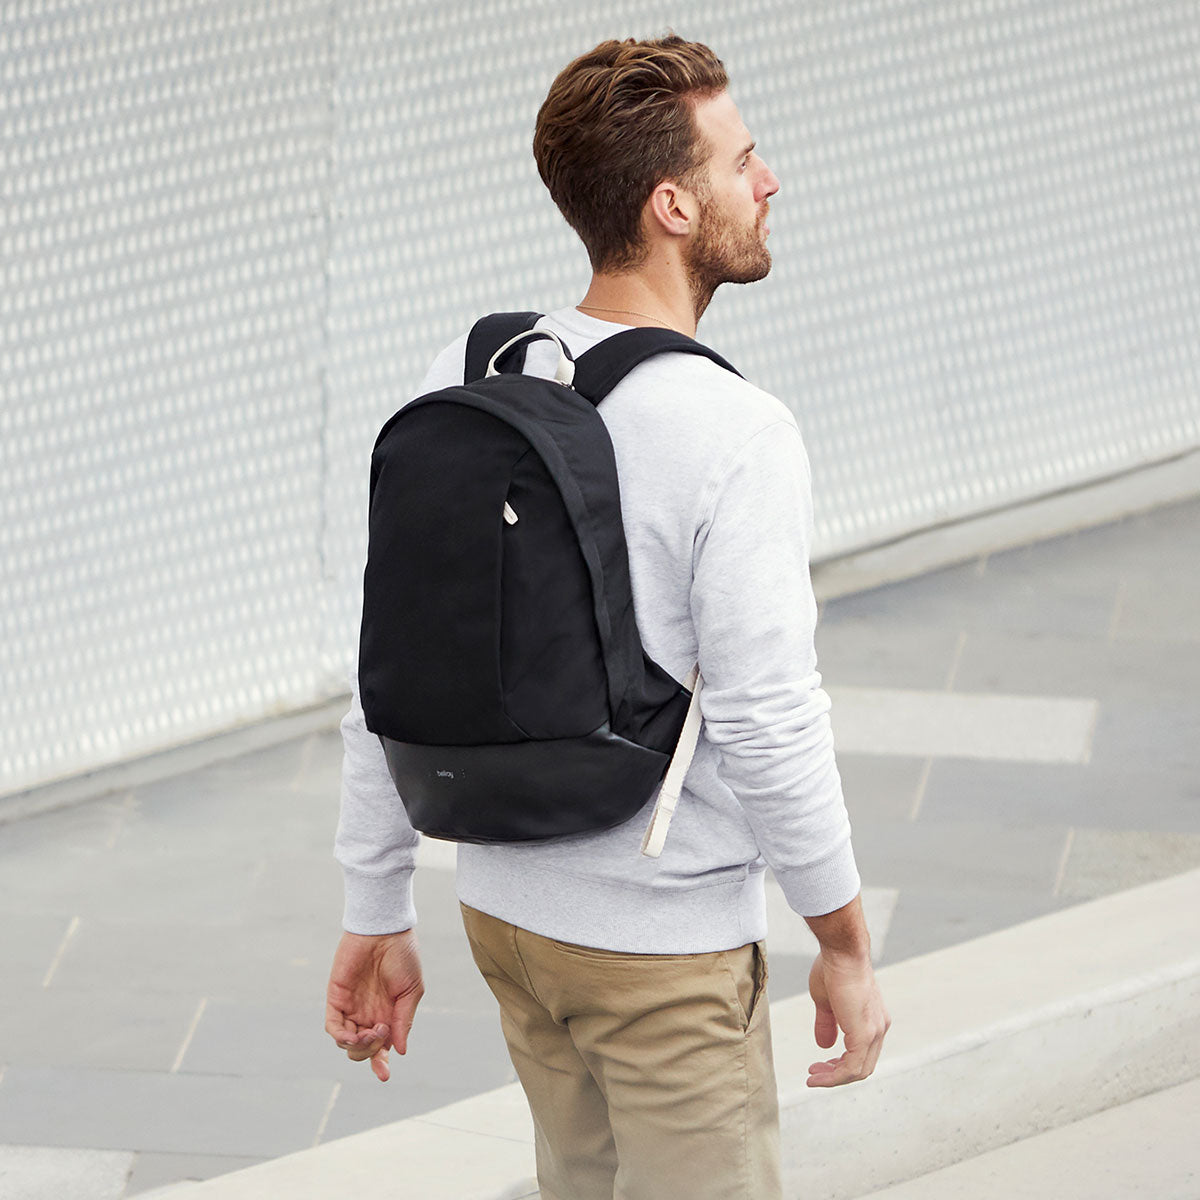 Bellroy Classic Backpack – Premium | Unisex Laptop Backpack - Storming Gravity